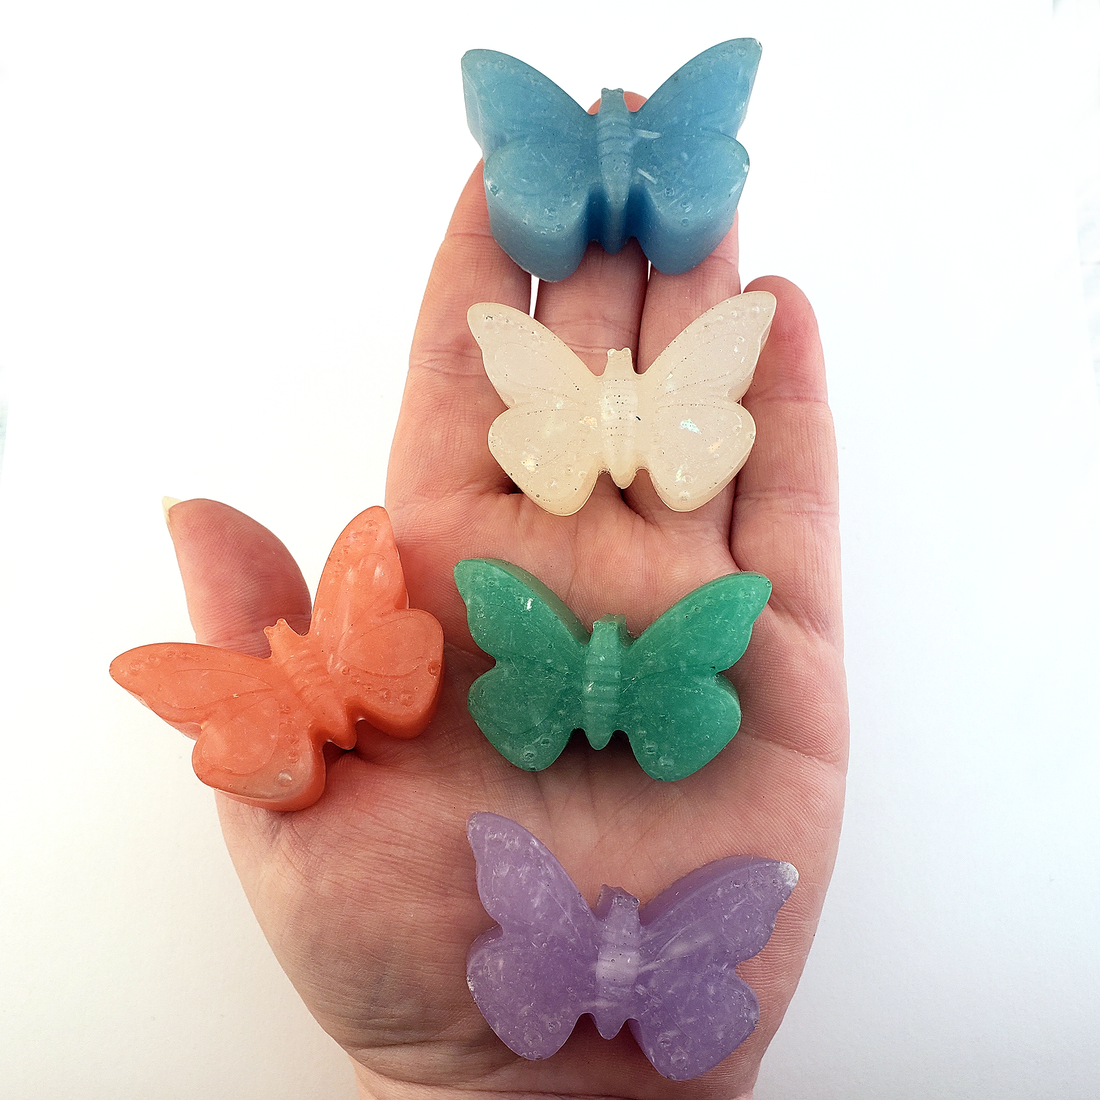  Rainbow Resin Butterfly Totem Figurine - Handmade Valentine's Day Gift - In Hand